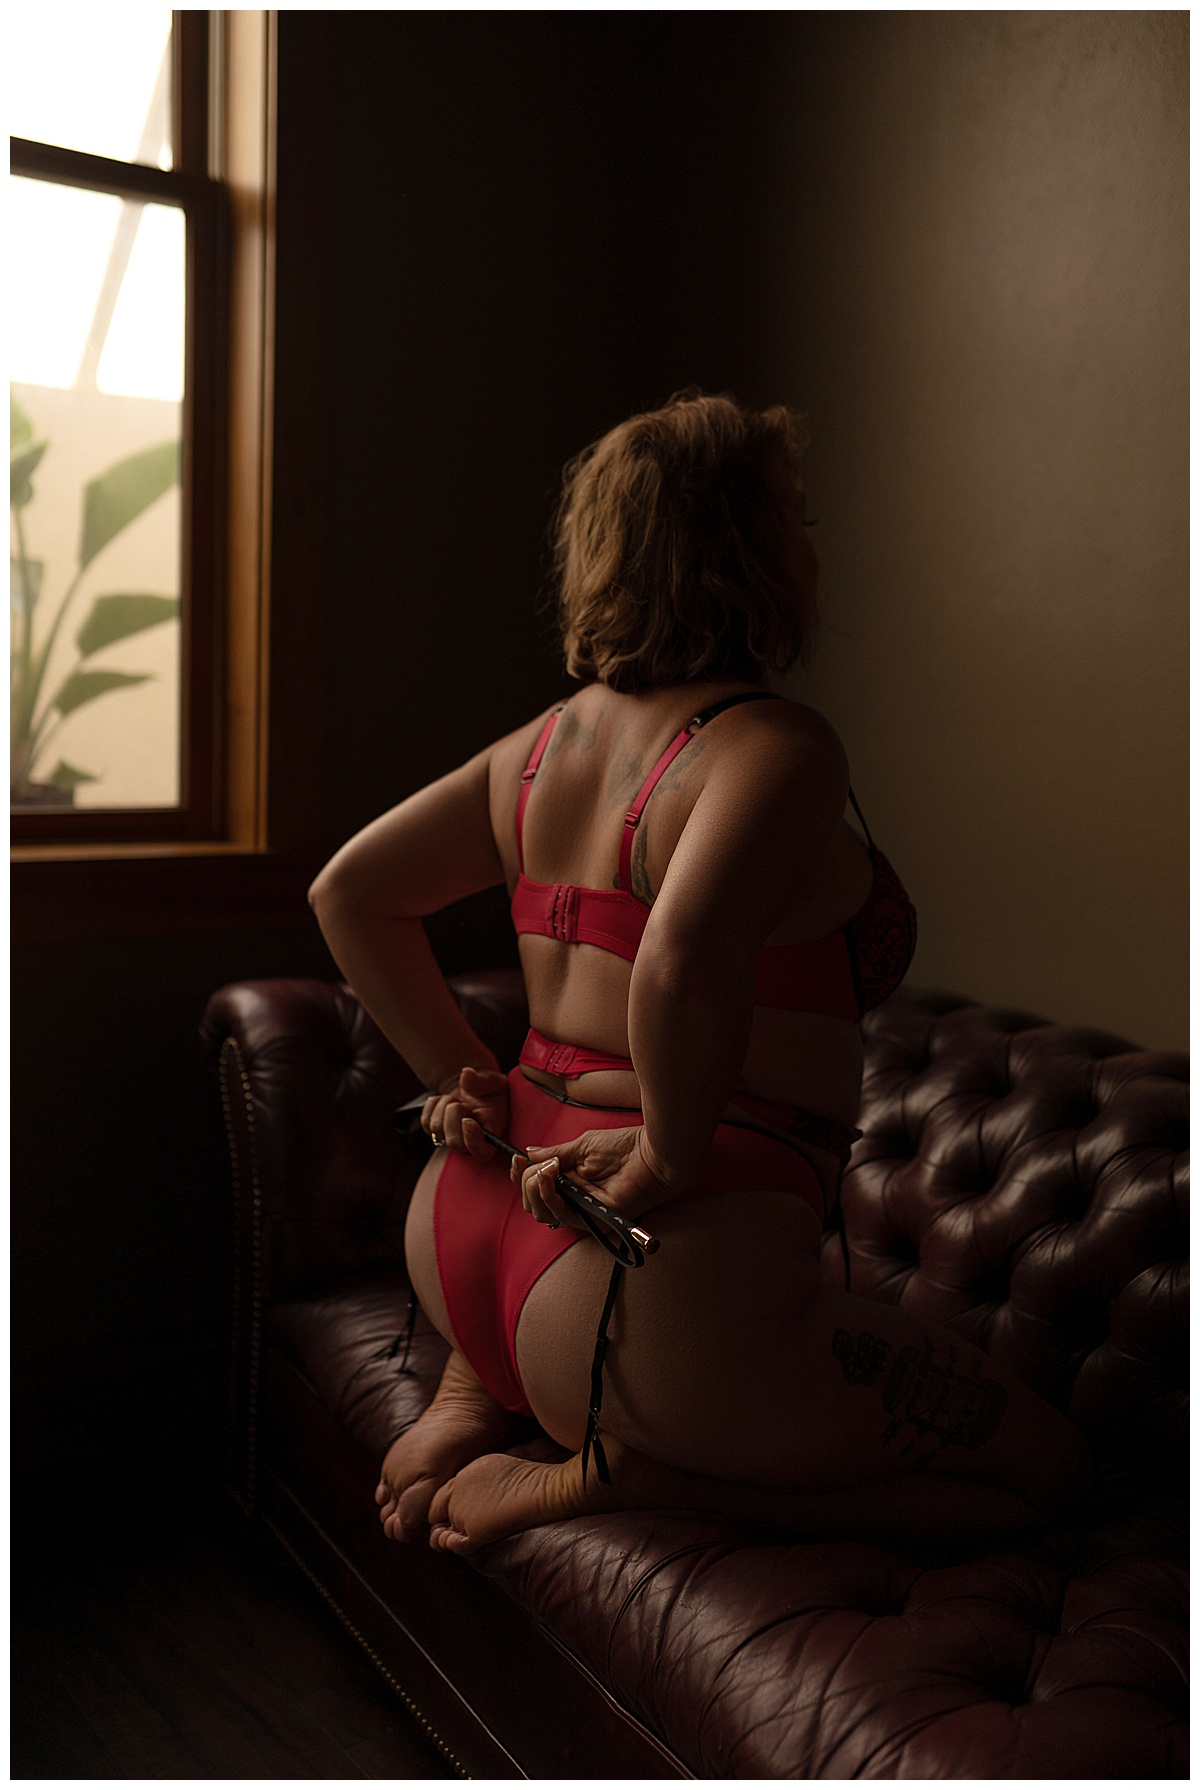 Adult uses Props For A Boudoir Session and holds the whip behind her back wearing red lingerie 